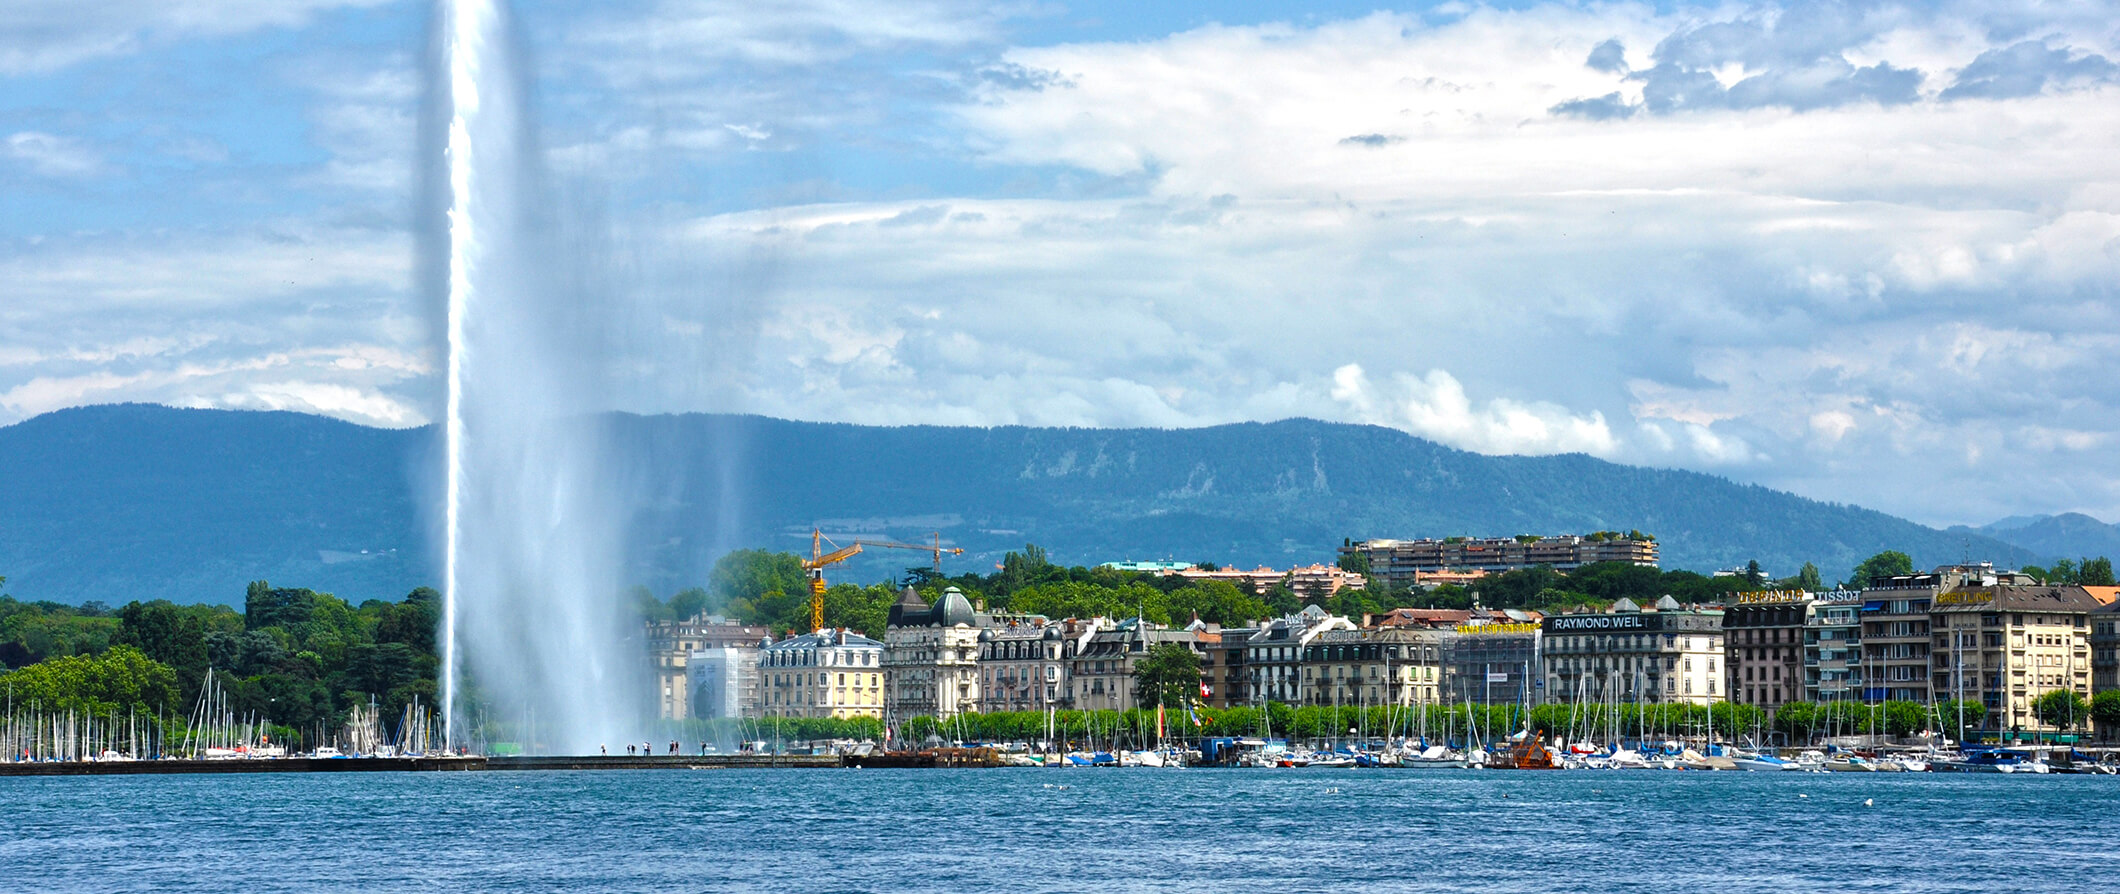 View of Geneva taken from the water.